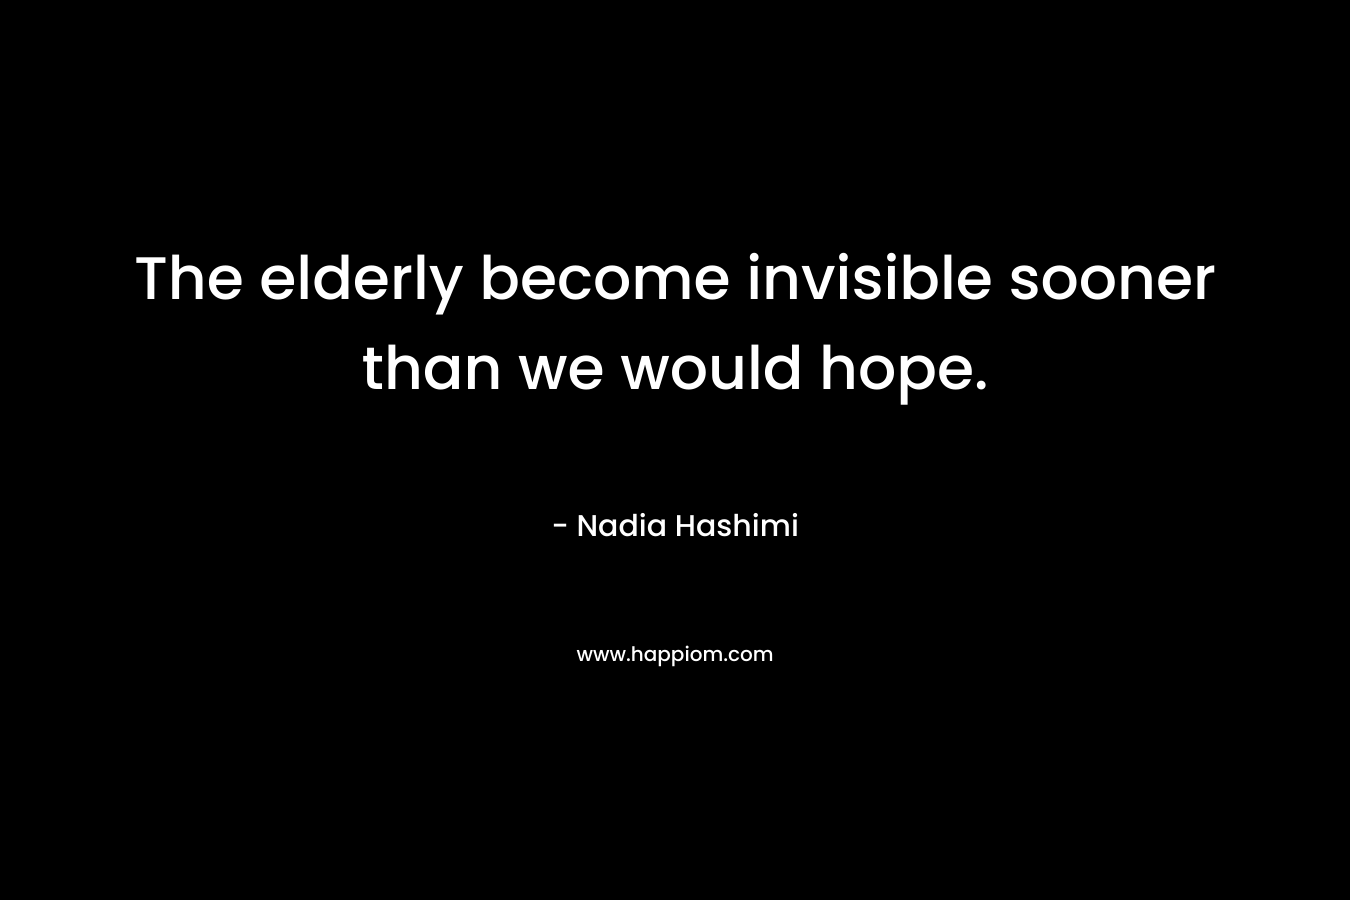 The elderly become invisible sooner than we would hope. – Nadia Hashimi